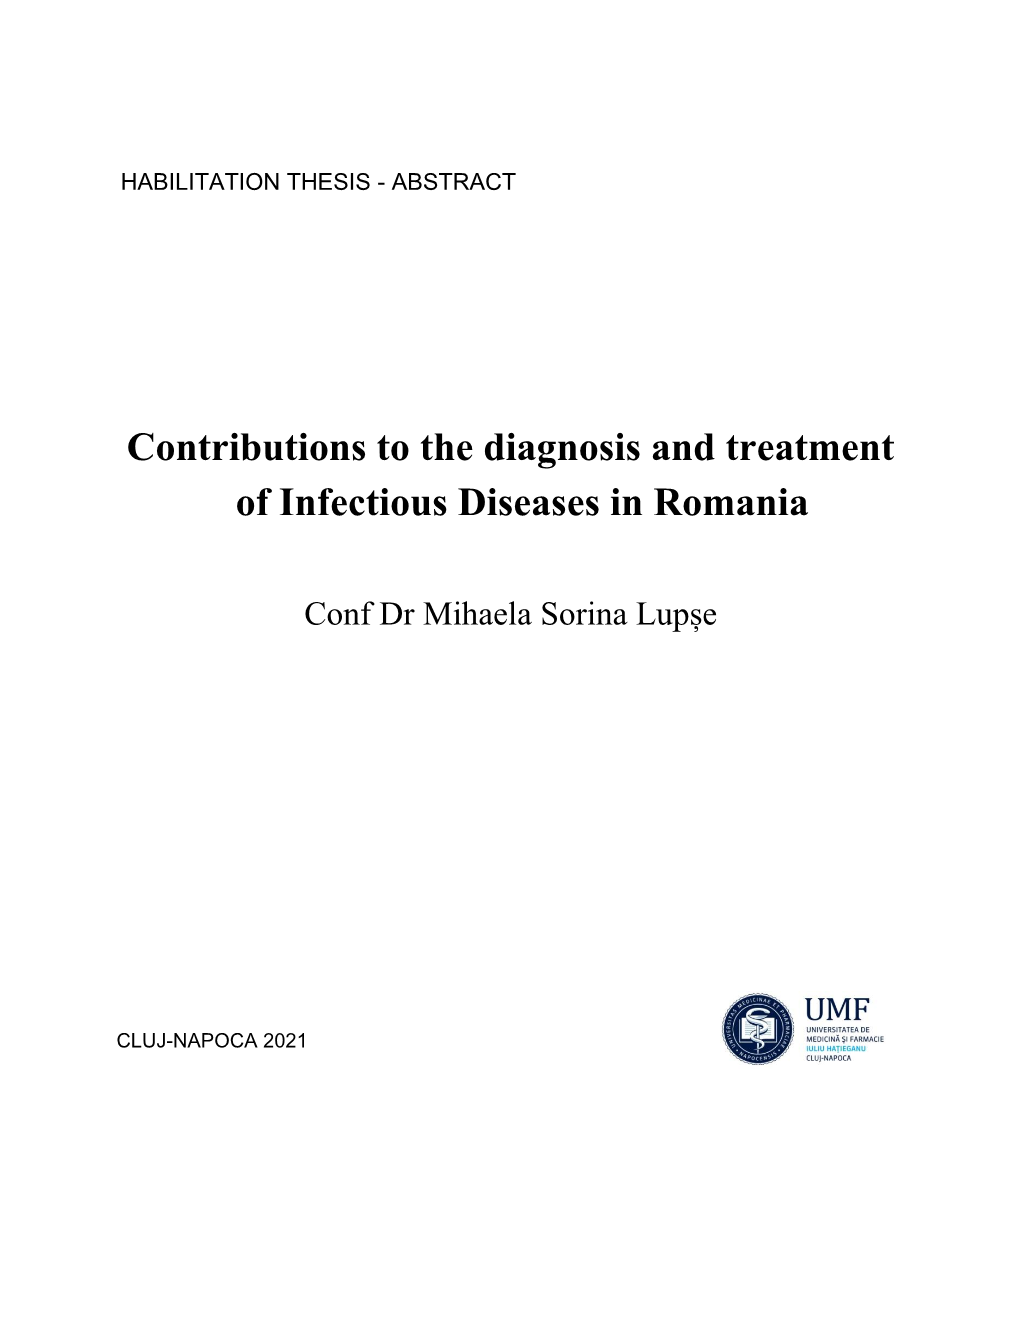 Contributions to the Diagnosis and Treatment of Infectious Diseases in Romania